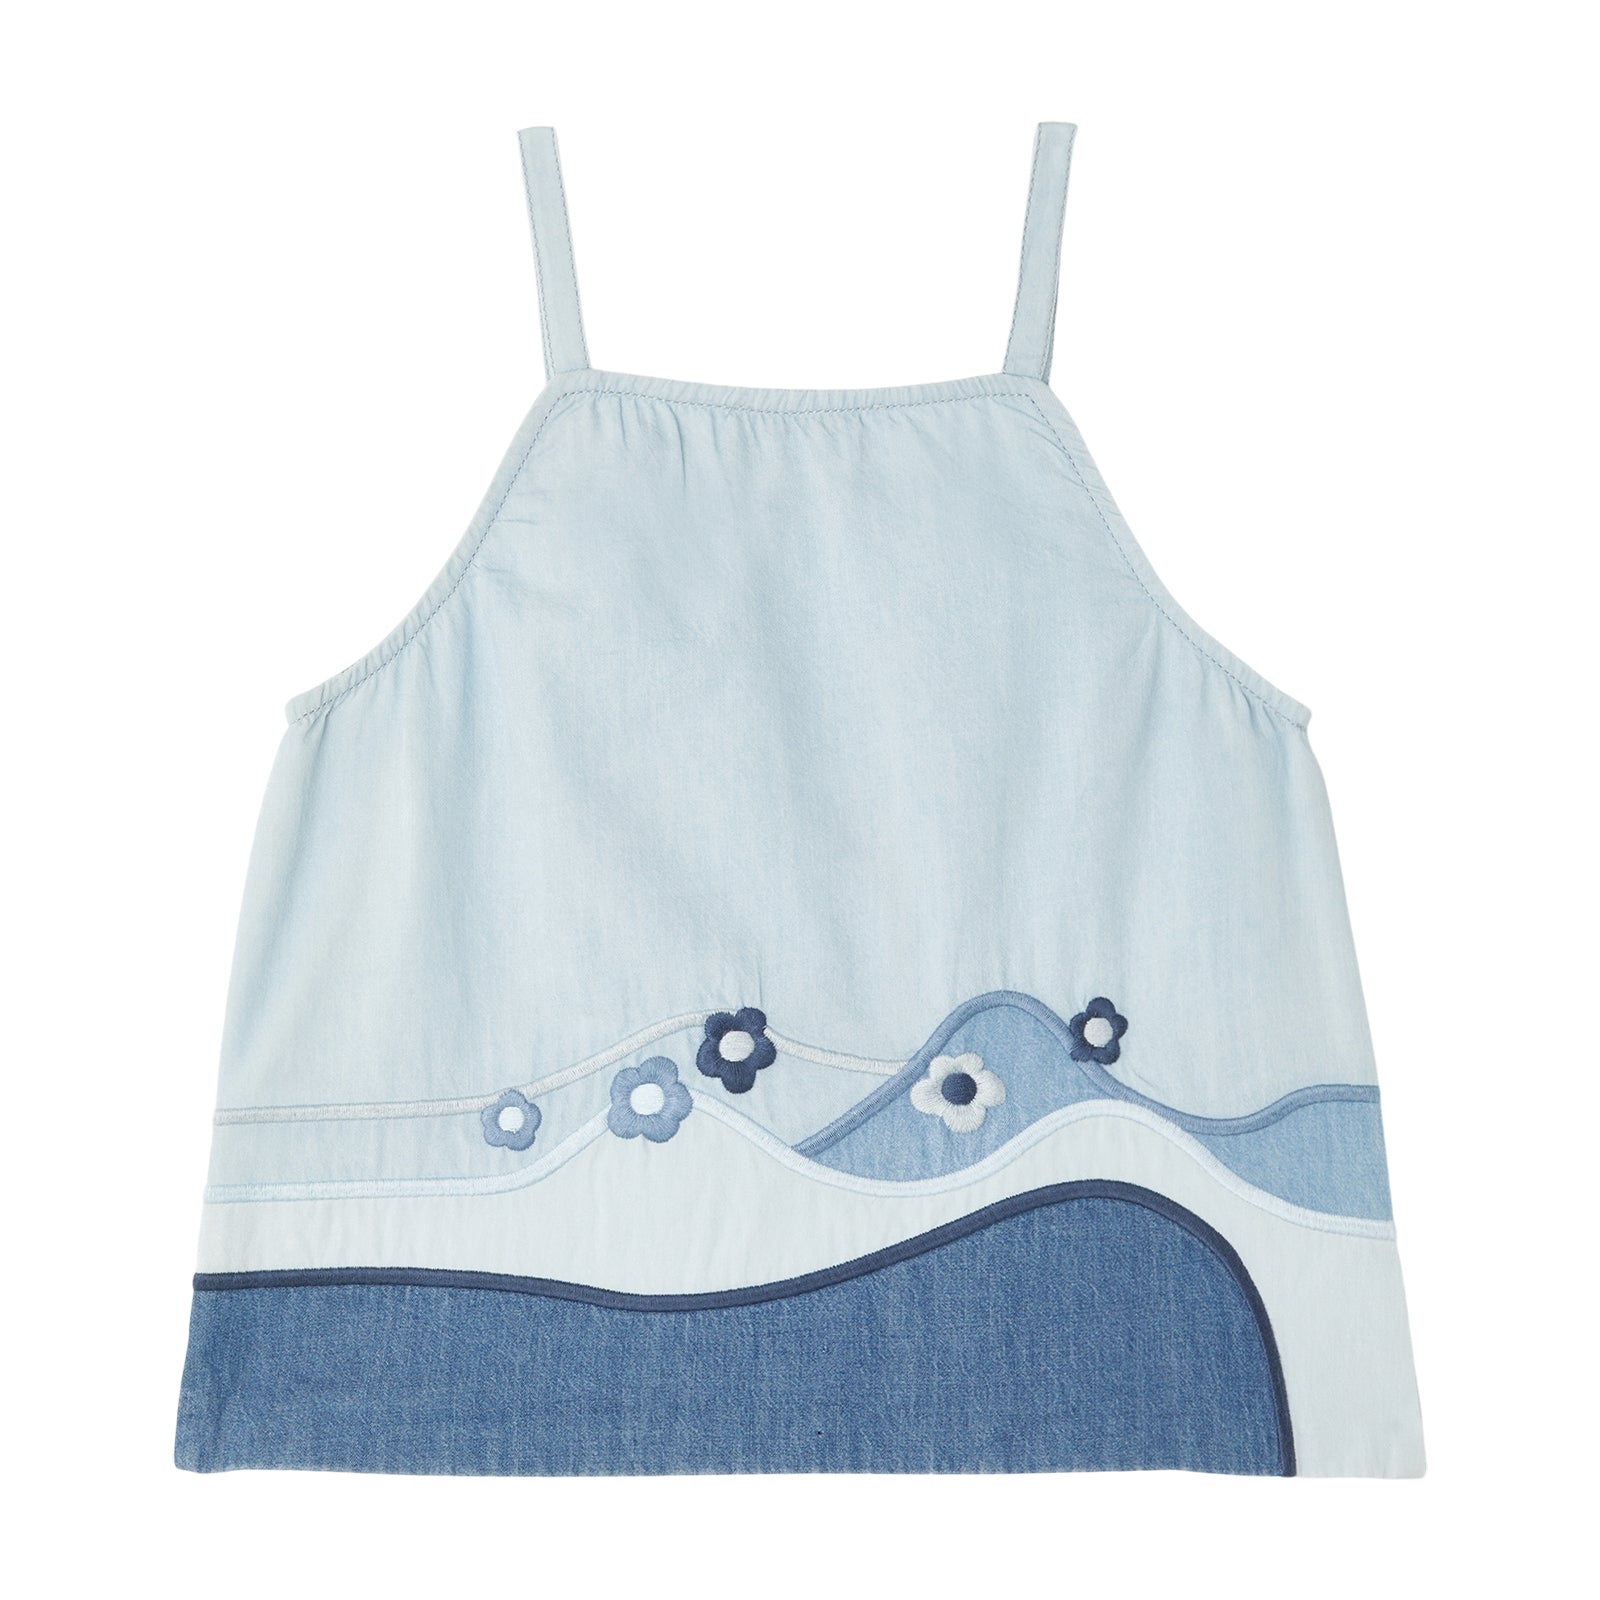 Girls Light Blue Embroidered Cotton Top